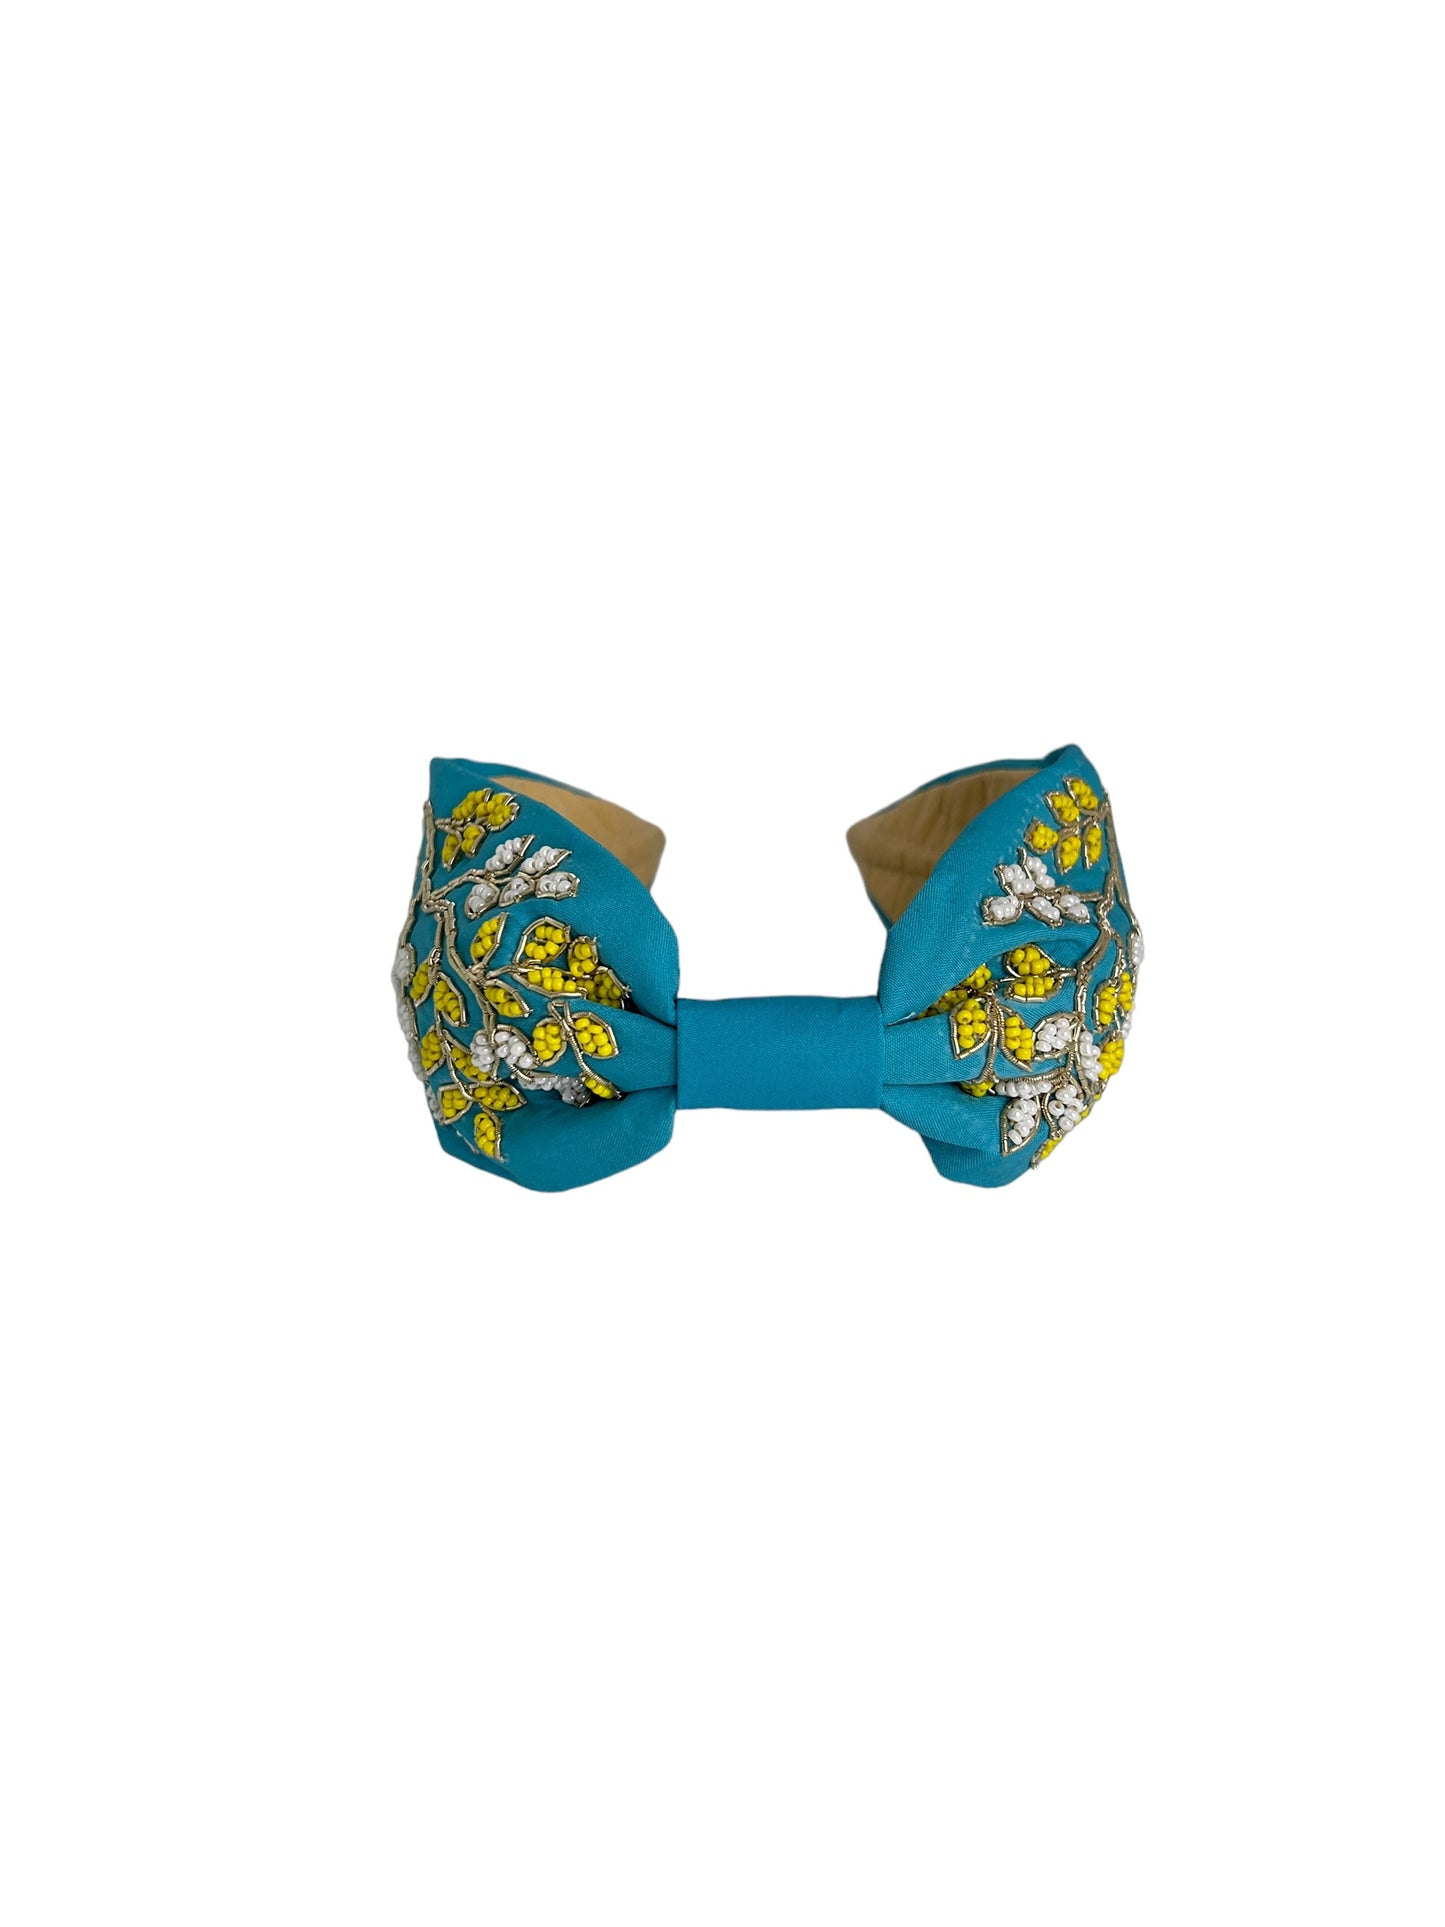 Headbands - Turquoise with white and yellow flowers and leaves